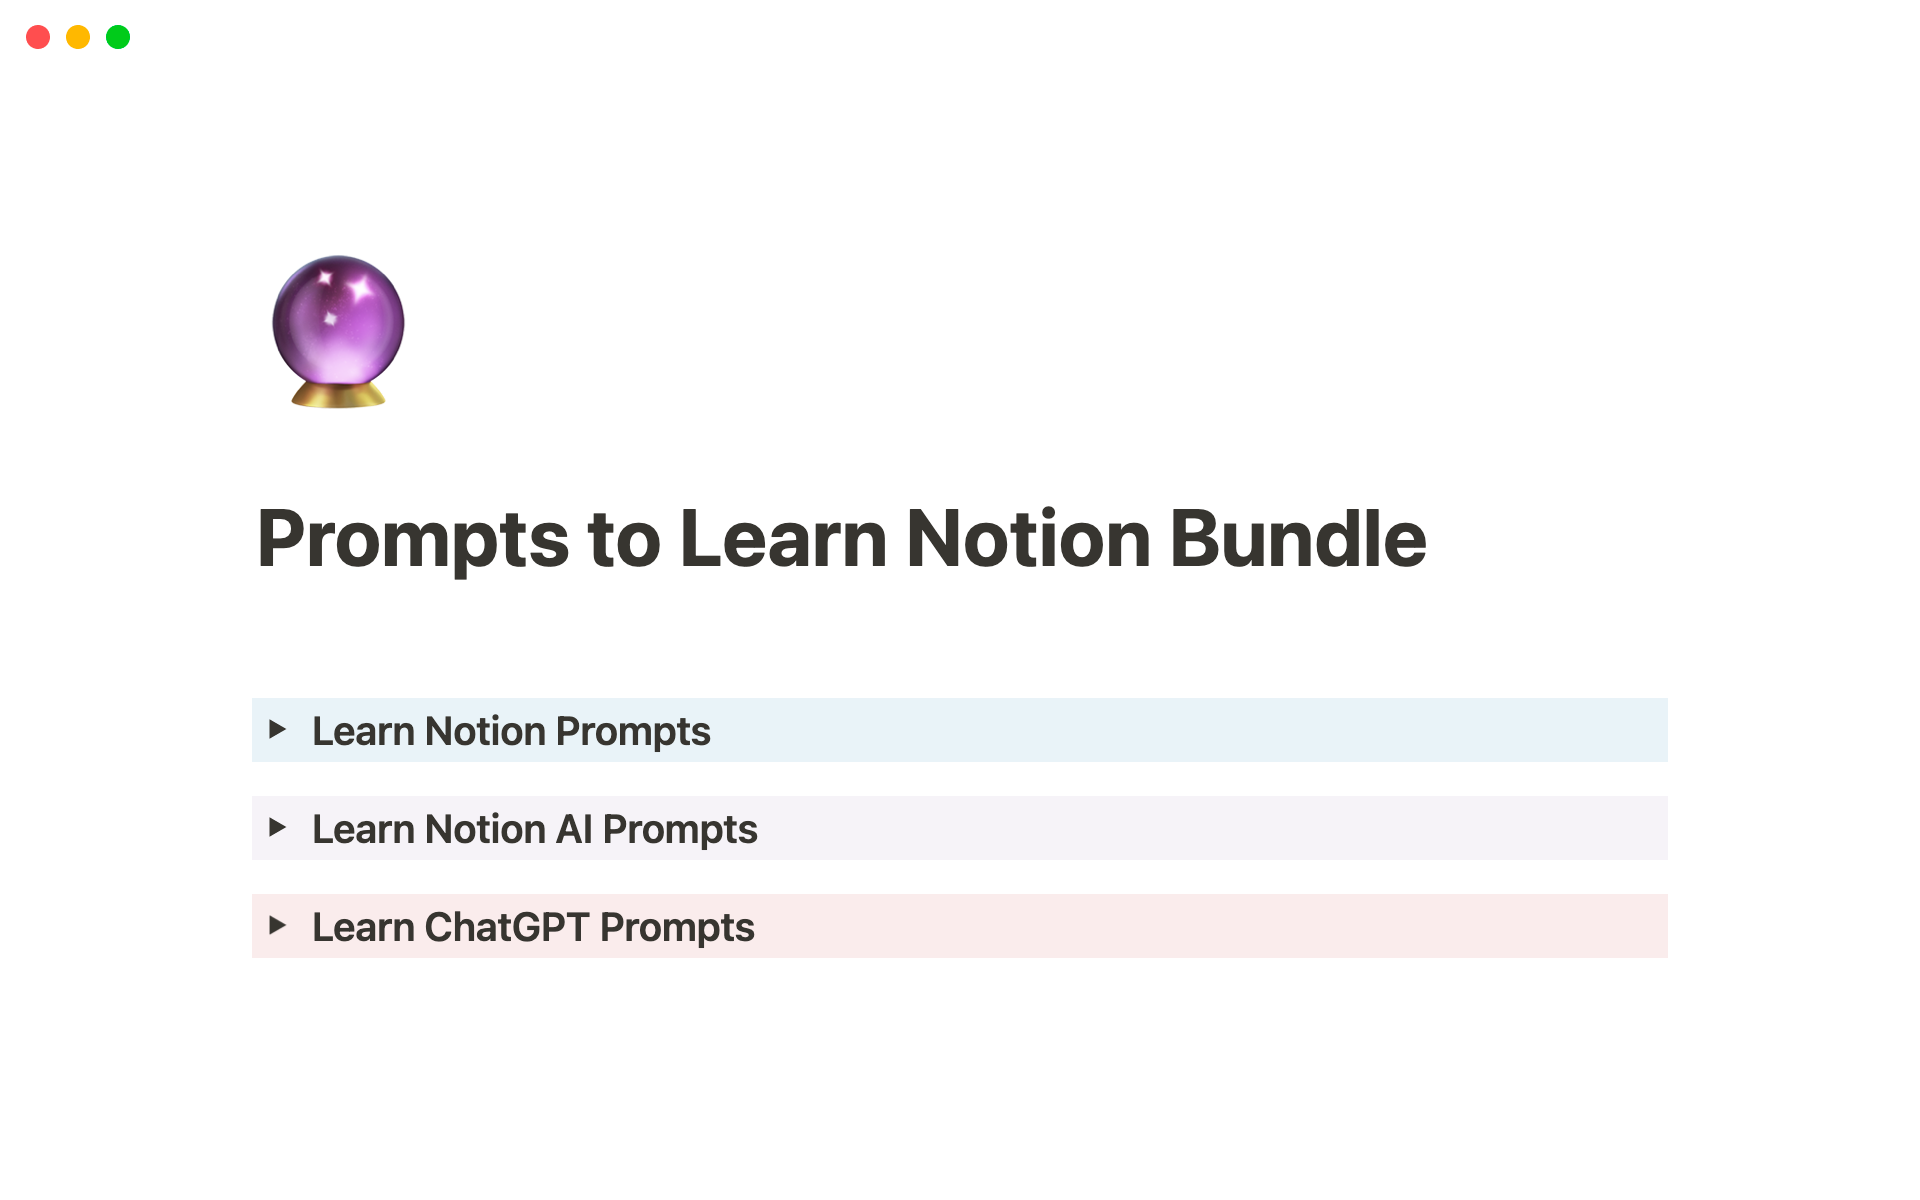 200 prompts to learn Notion!